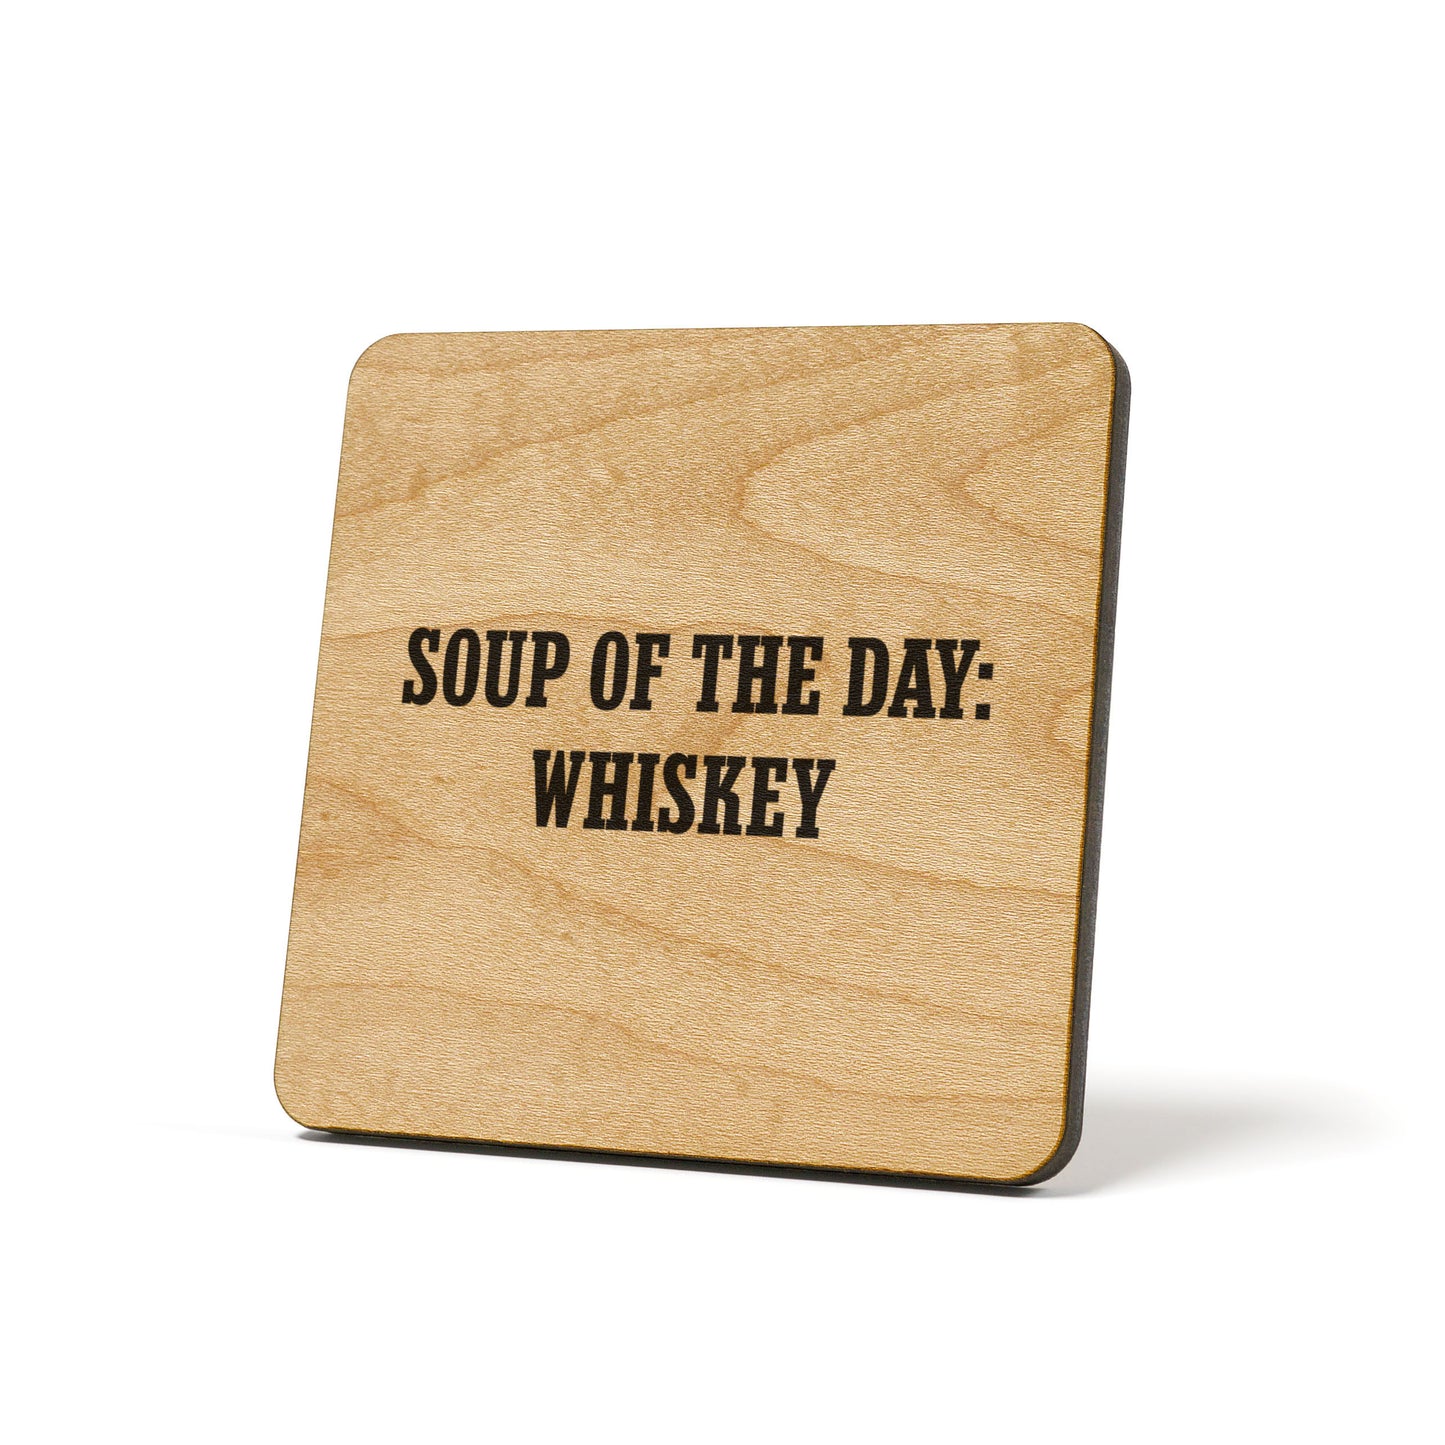 Soup Of The Day: Whis Quote Coaster